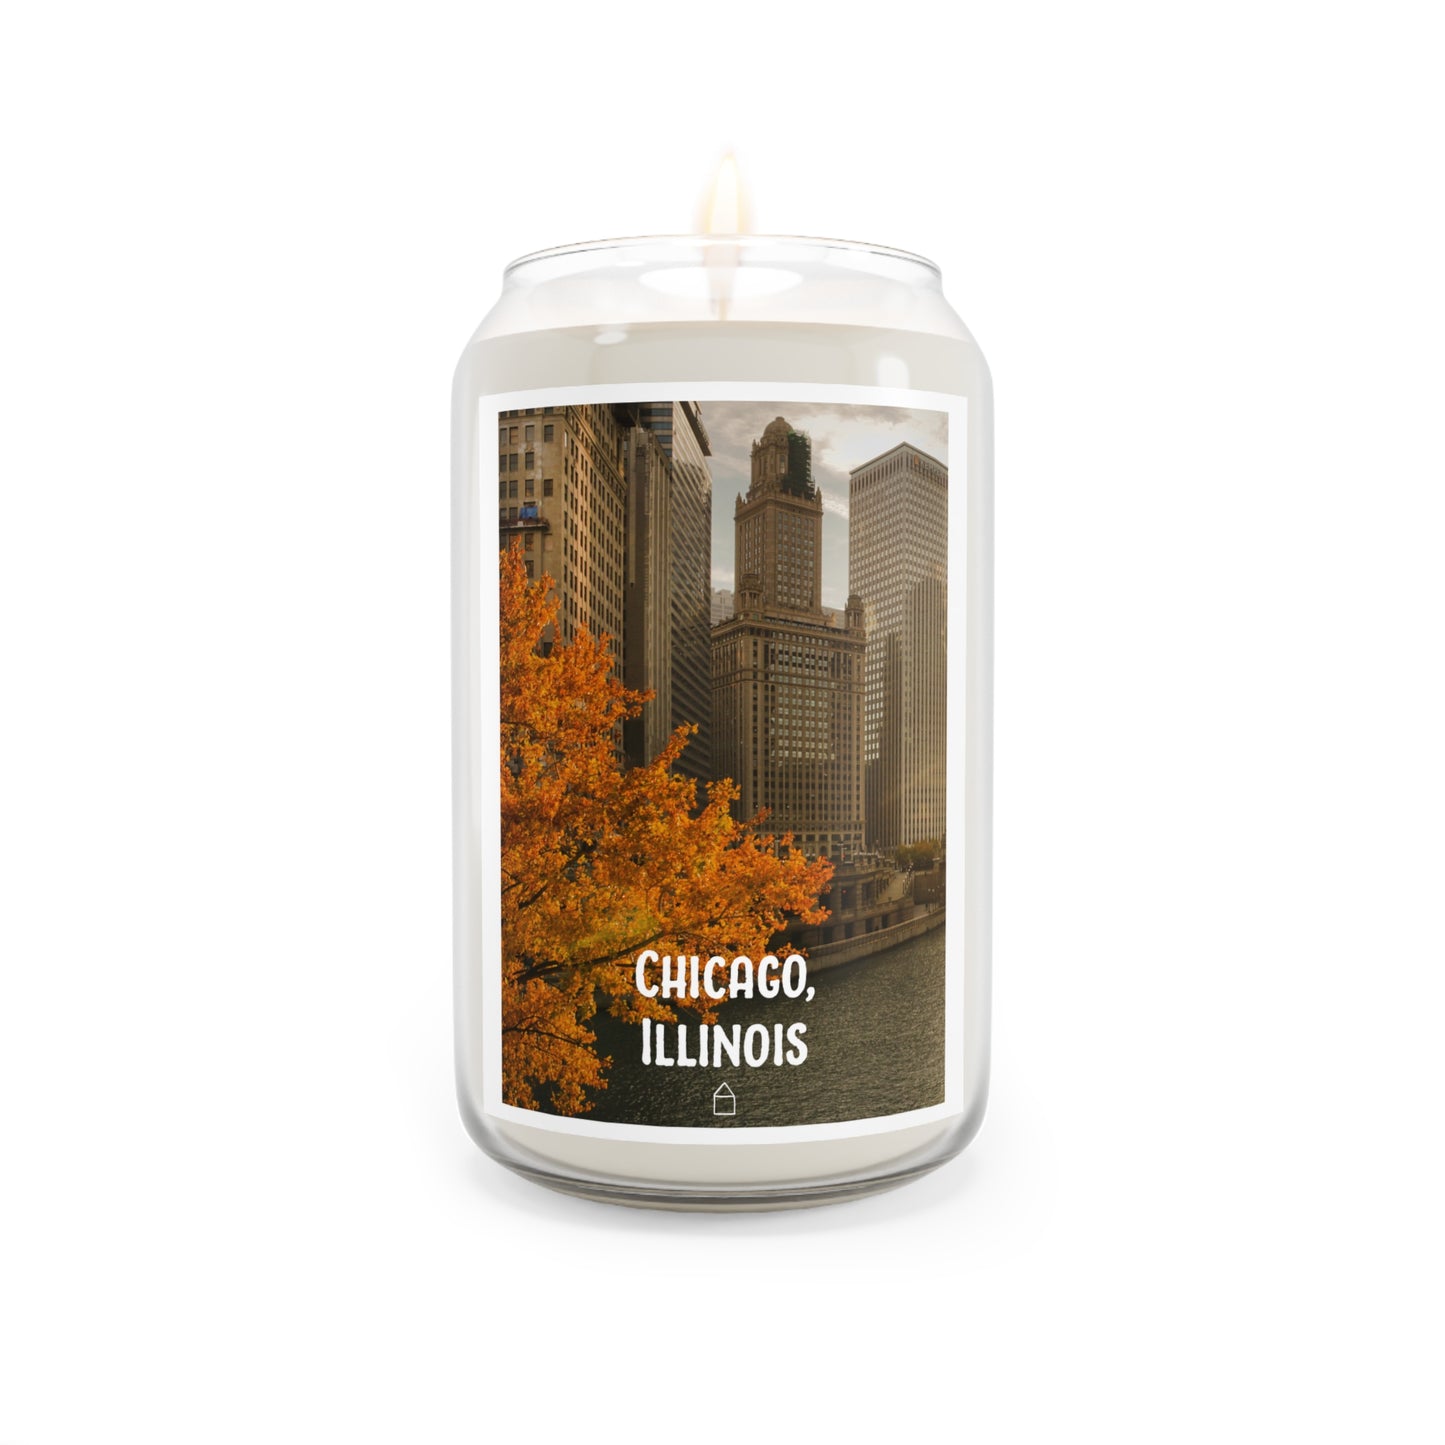 Chicago, Illinois (#007) - Home Town Candles, 13.75oz